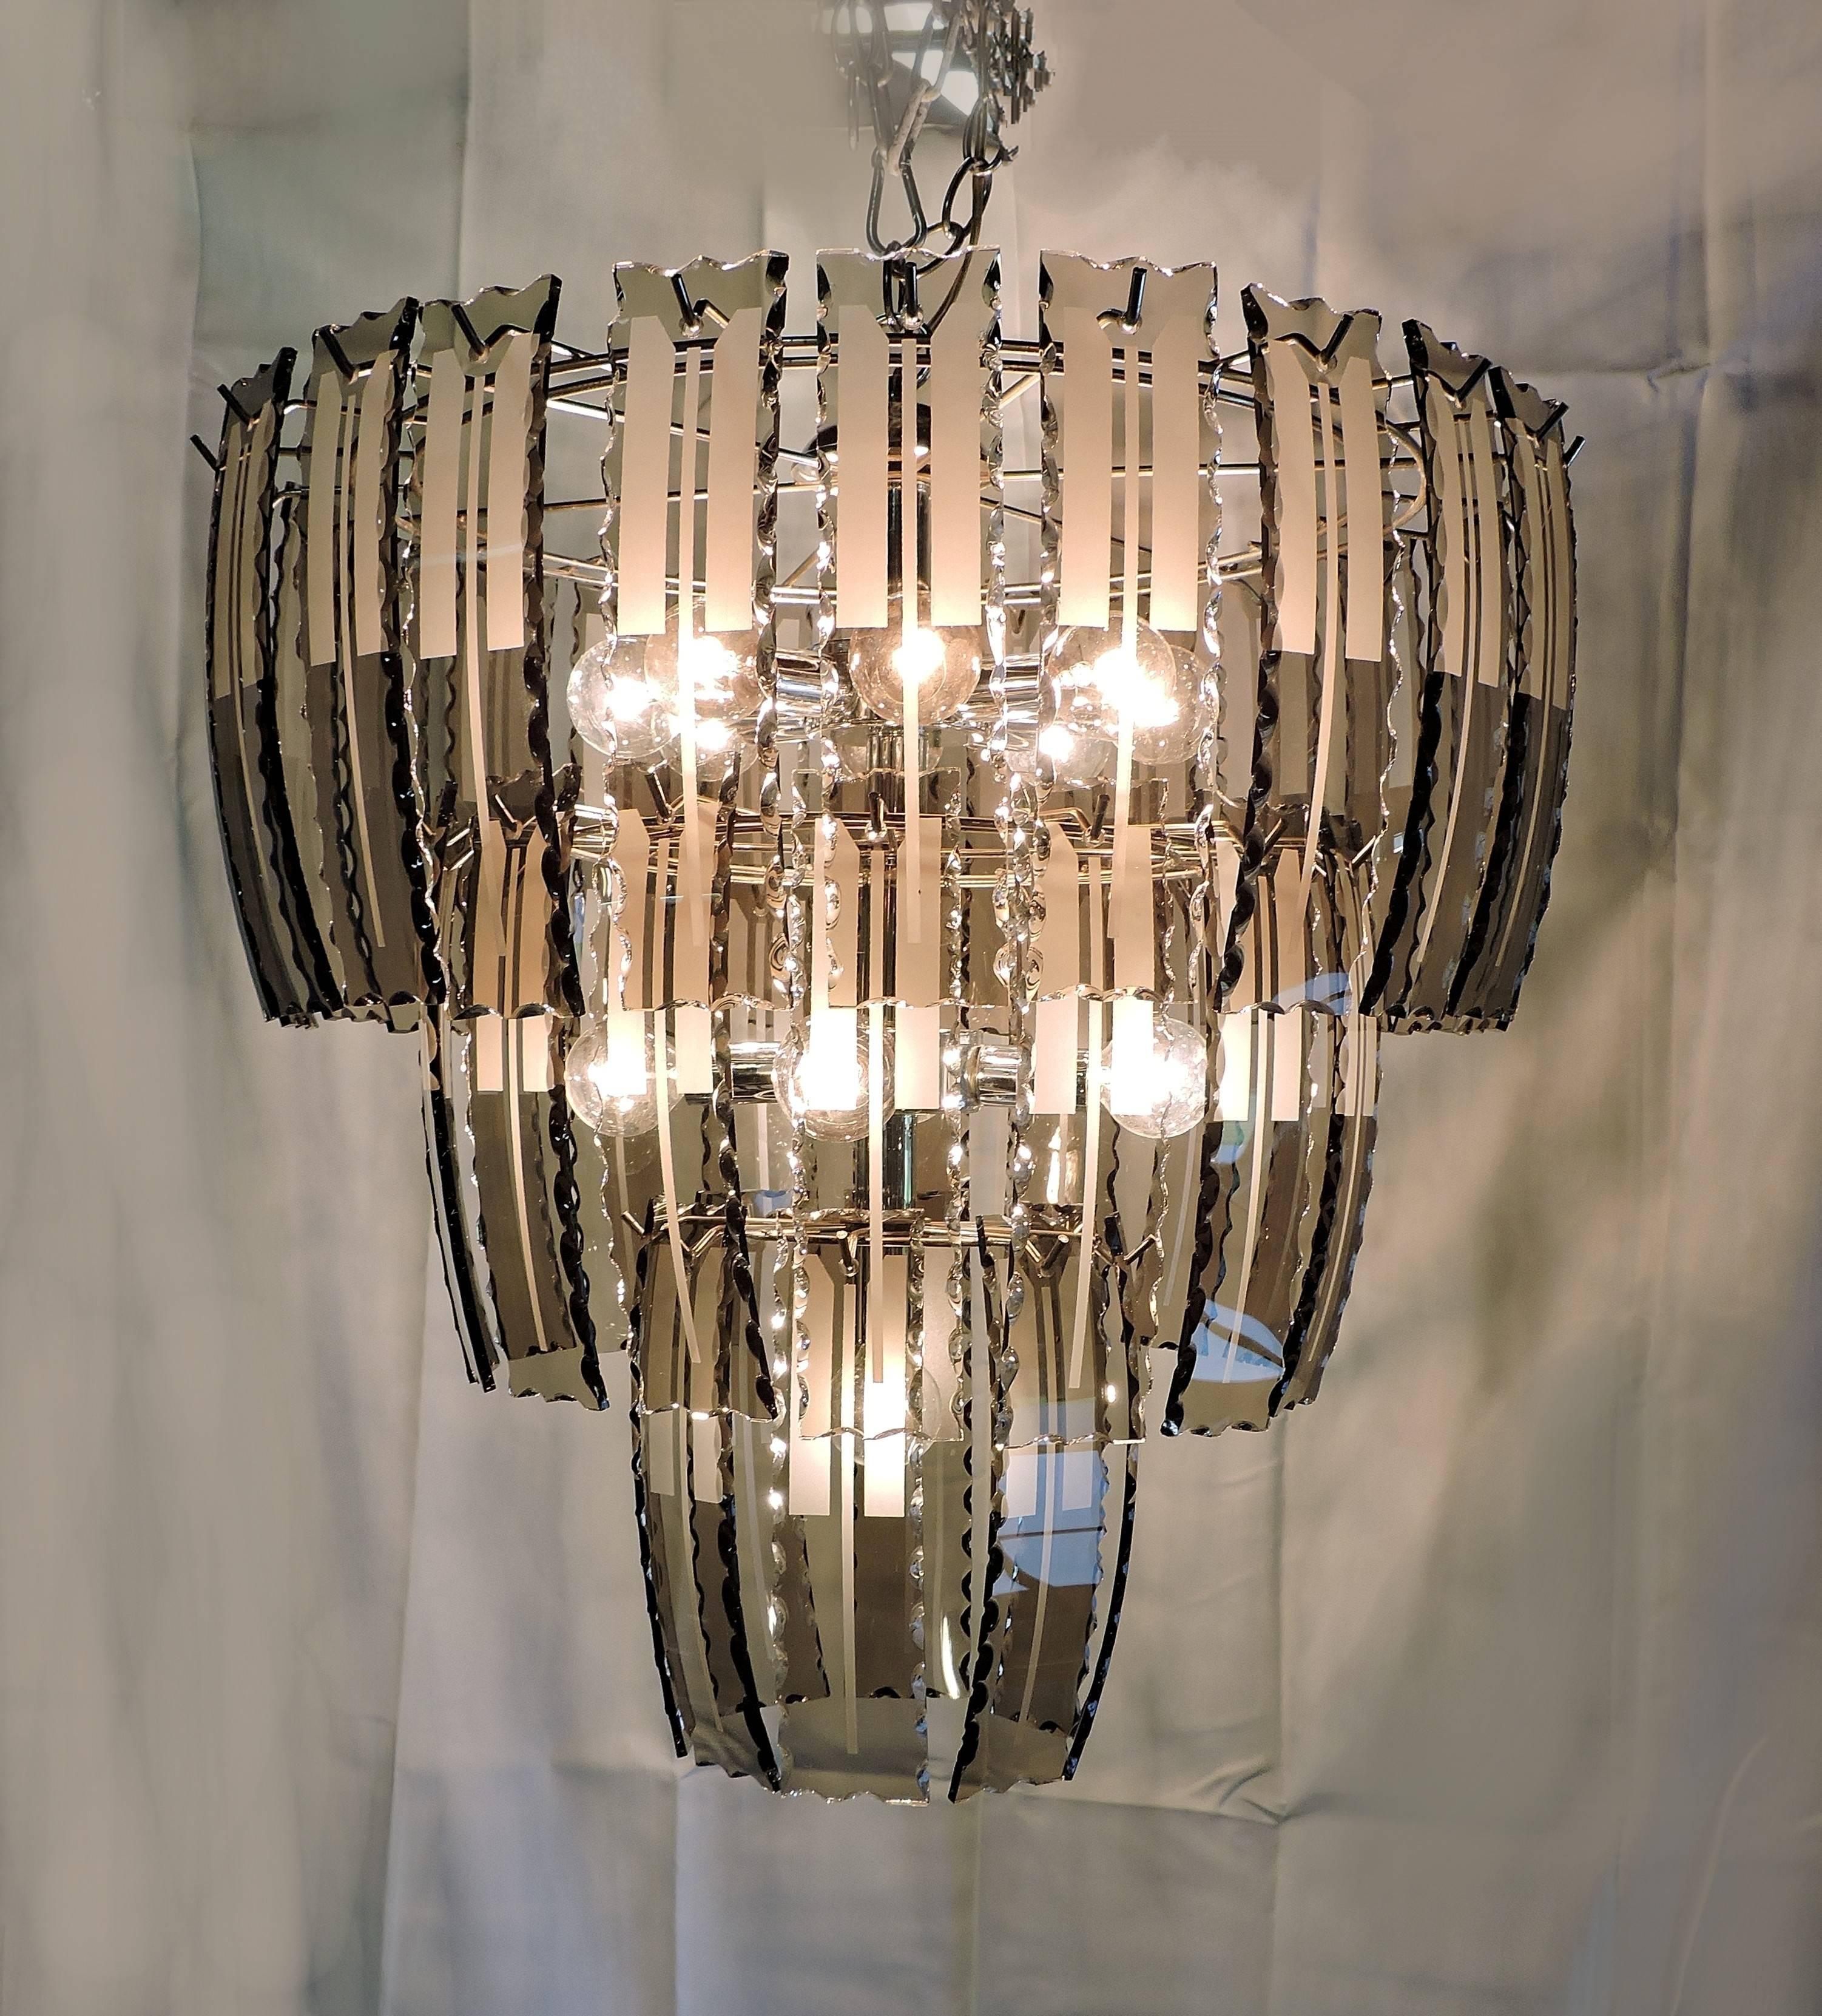 Beautiful Fontana Arte style chandelier with three tiers of curved smoked and etched glass panels. Serrated edges to the glass give added texture and sparkle. This fixture takes 13 candelabra base bulbs, has a long chain for hanging, and also